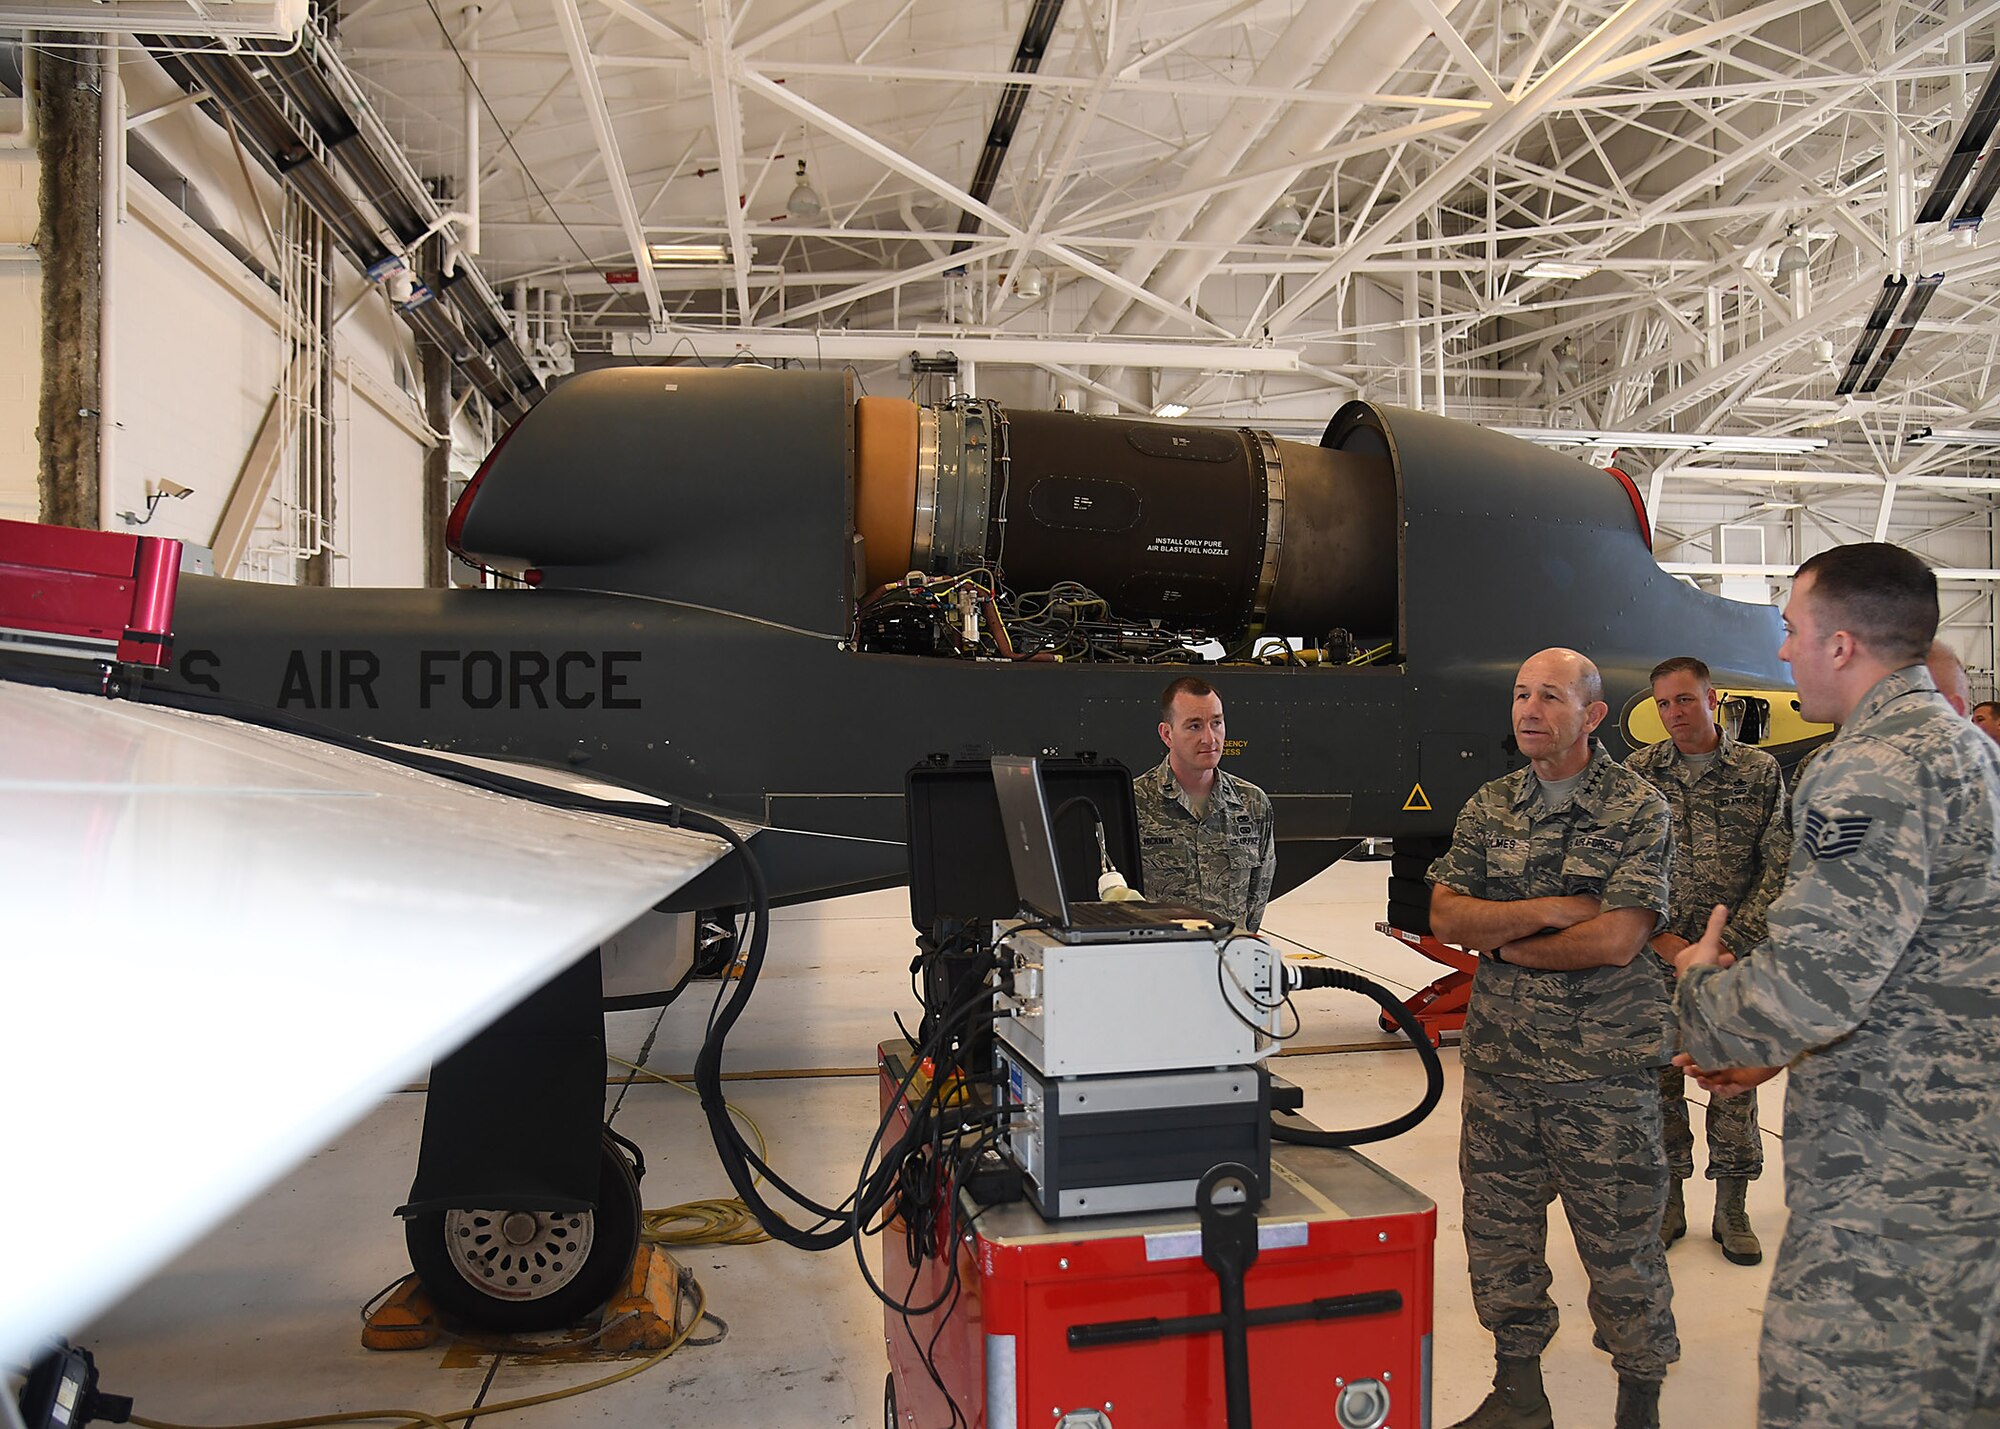 Gen. Mike Holmes, Air Combat Command commander, watches a Mobile Automated Scanner demonstration June 15, 2017, on Grand Forks AFB, N.D. Members of the 69th Maintenance Group were the first Airmen to complete this type of scan on the RQ-4 Global Hawk. (U.S. Air Force photo by Senior Airman Ryan Sparks)